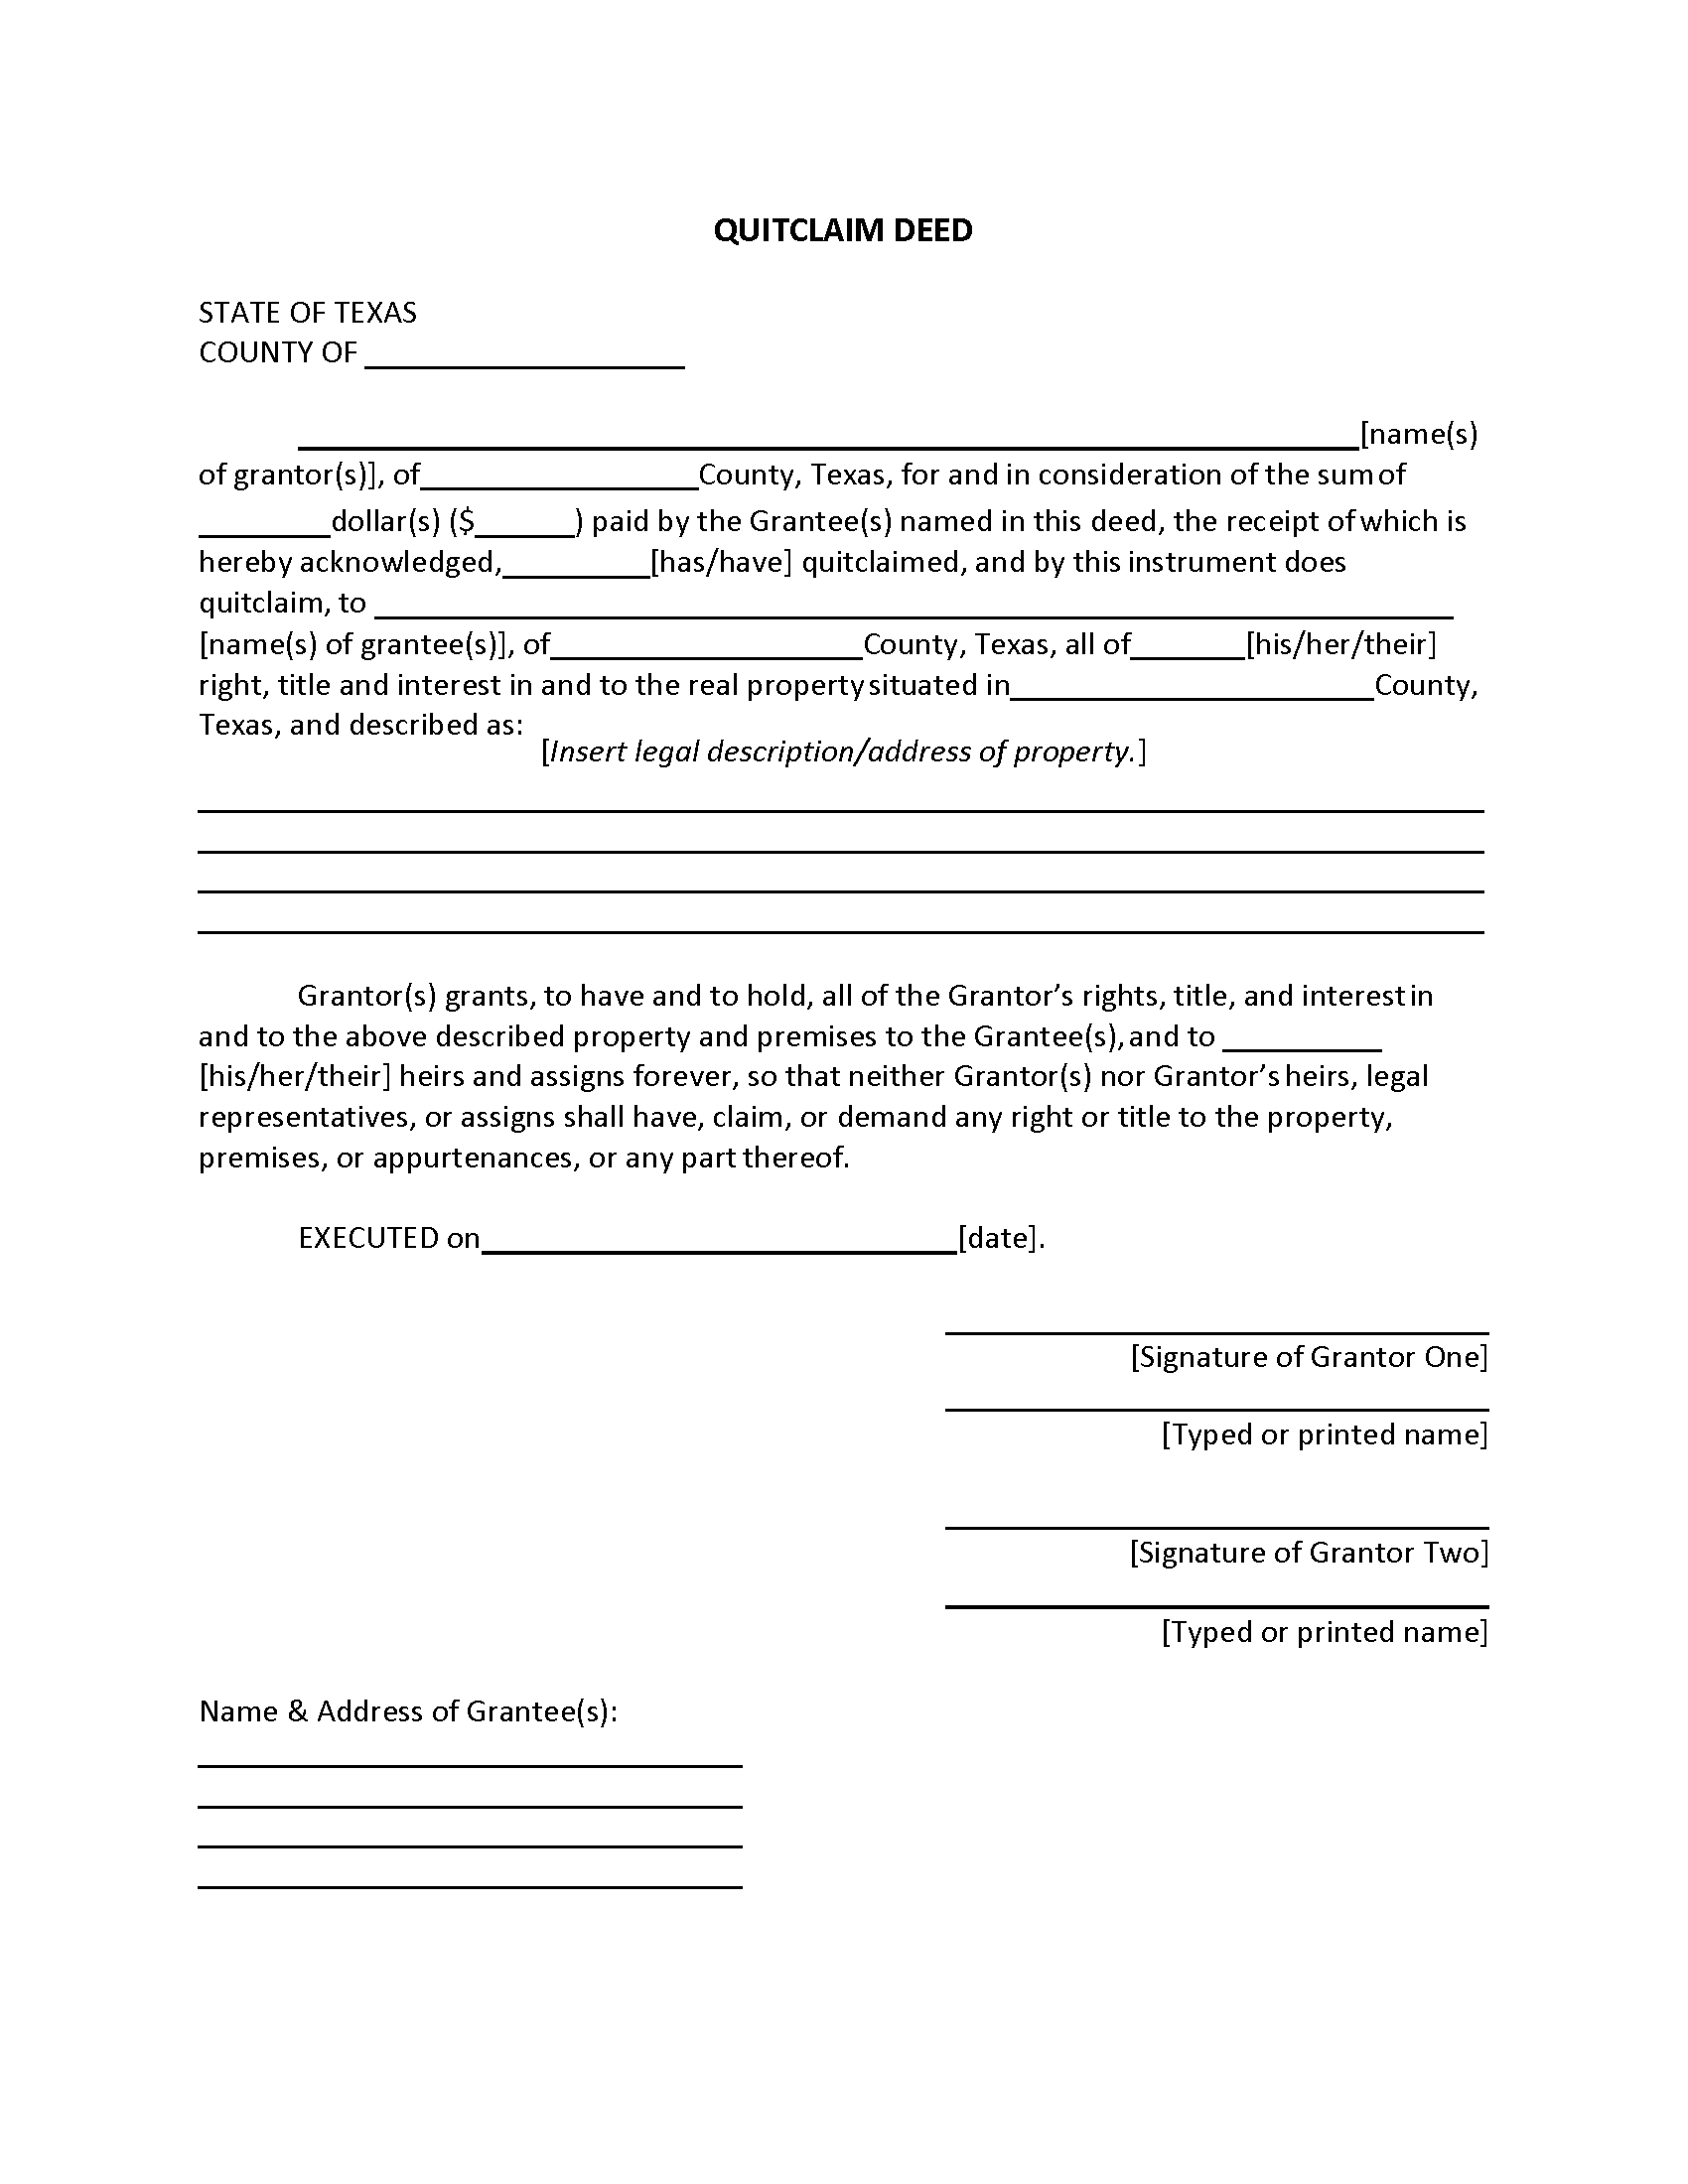 texas-quit-claim-deed-free-printable-legal-forms